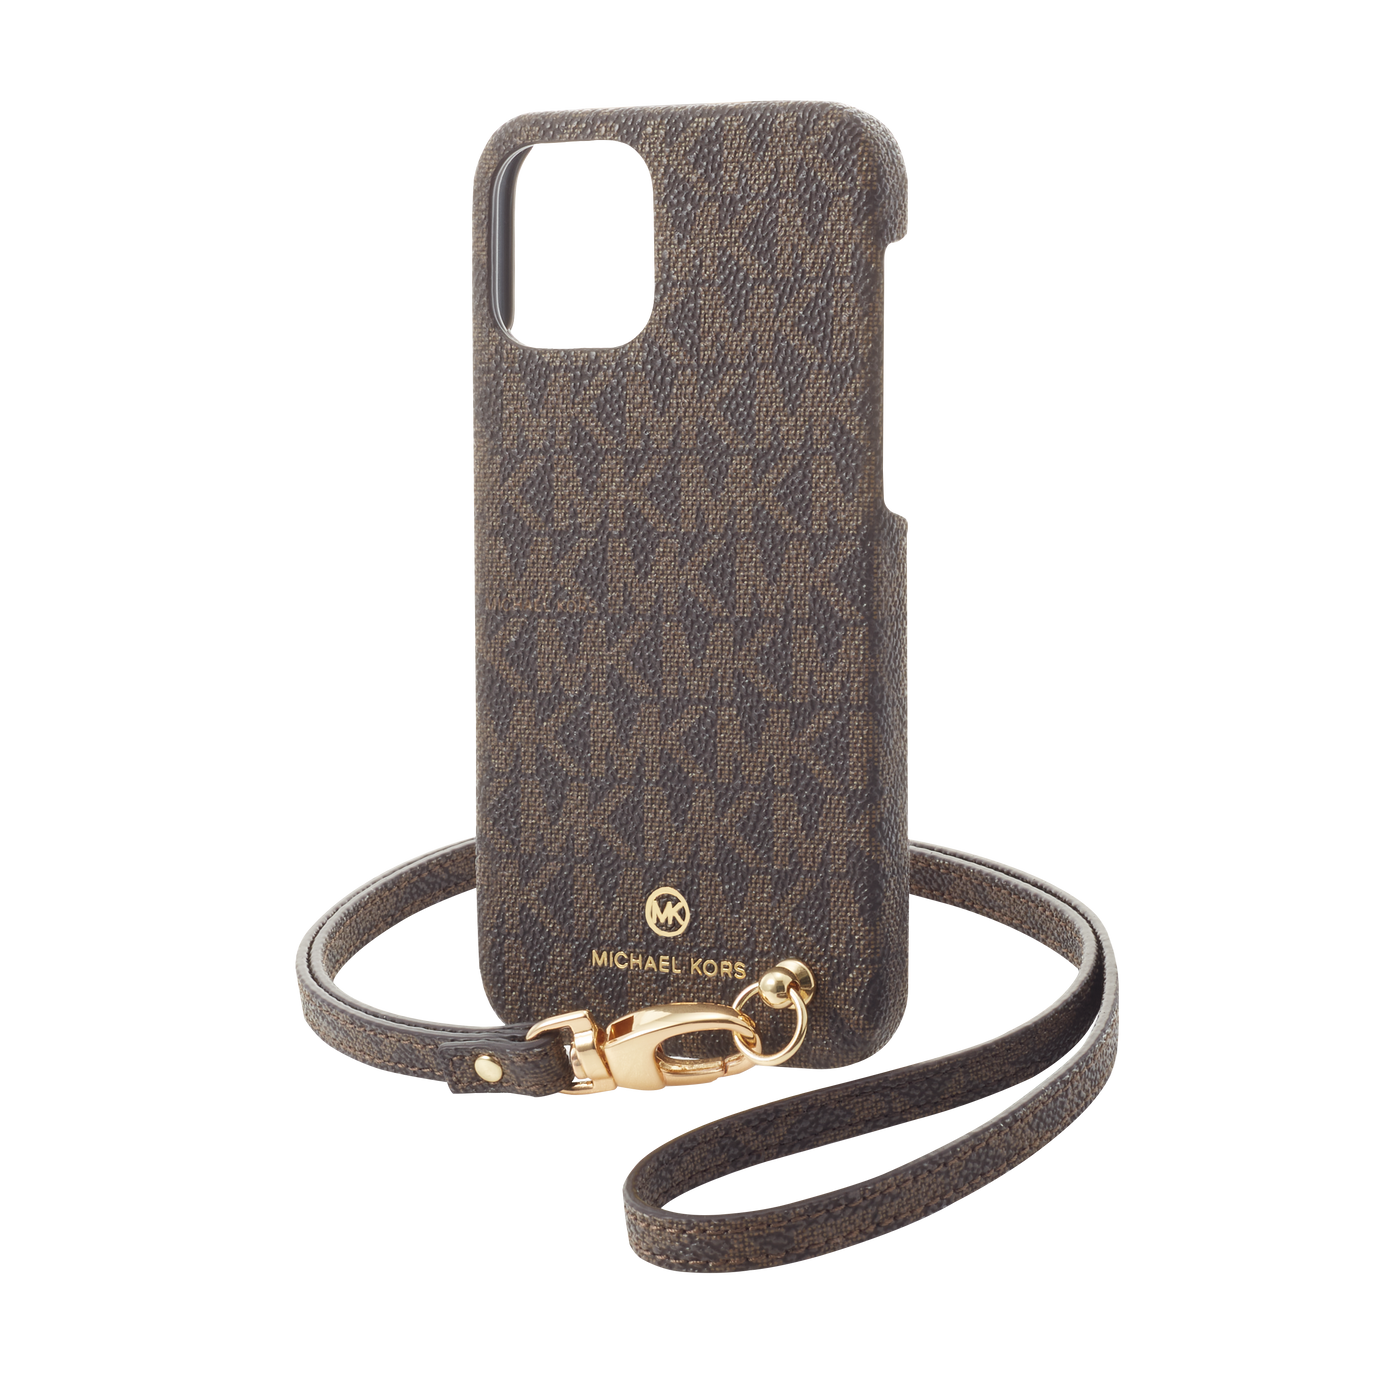 MICHAEL KORS - Slim Wrap Case Signature with Neck Strap - Magsafe for iPhone 12/12 Pro - Brown